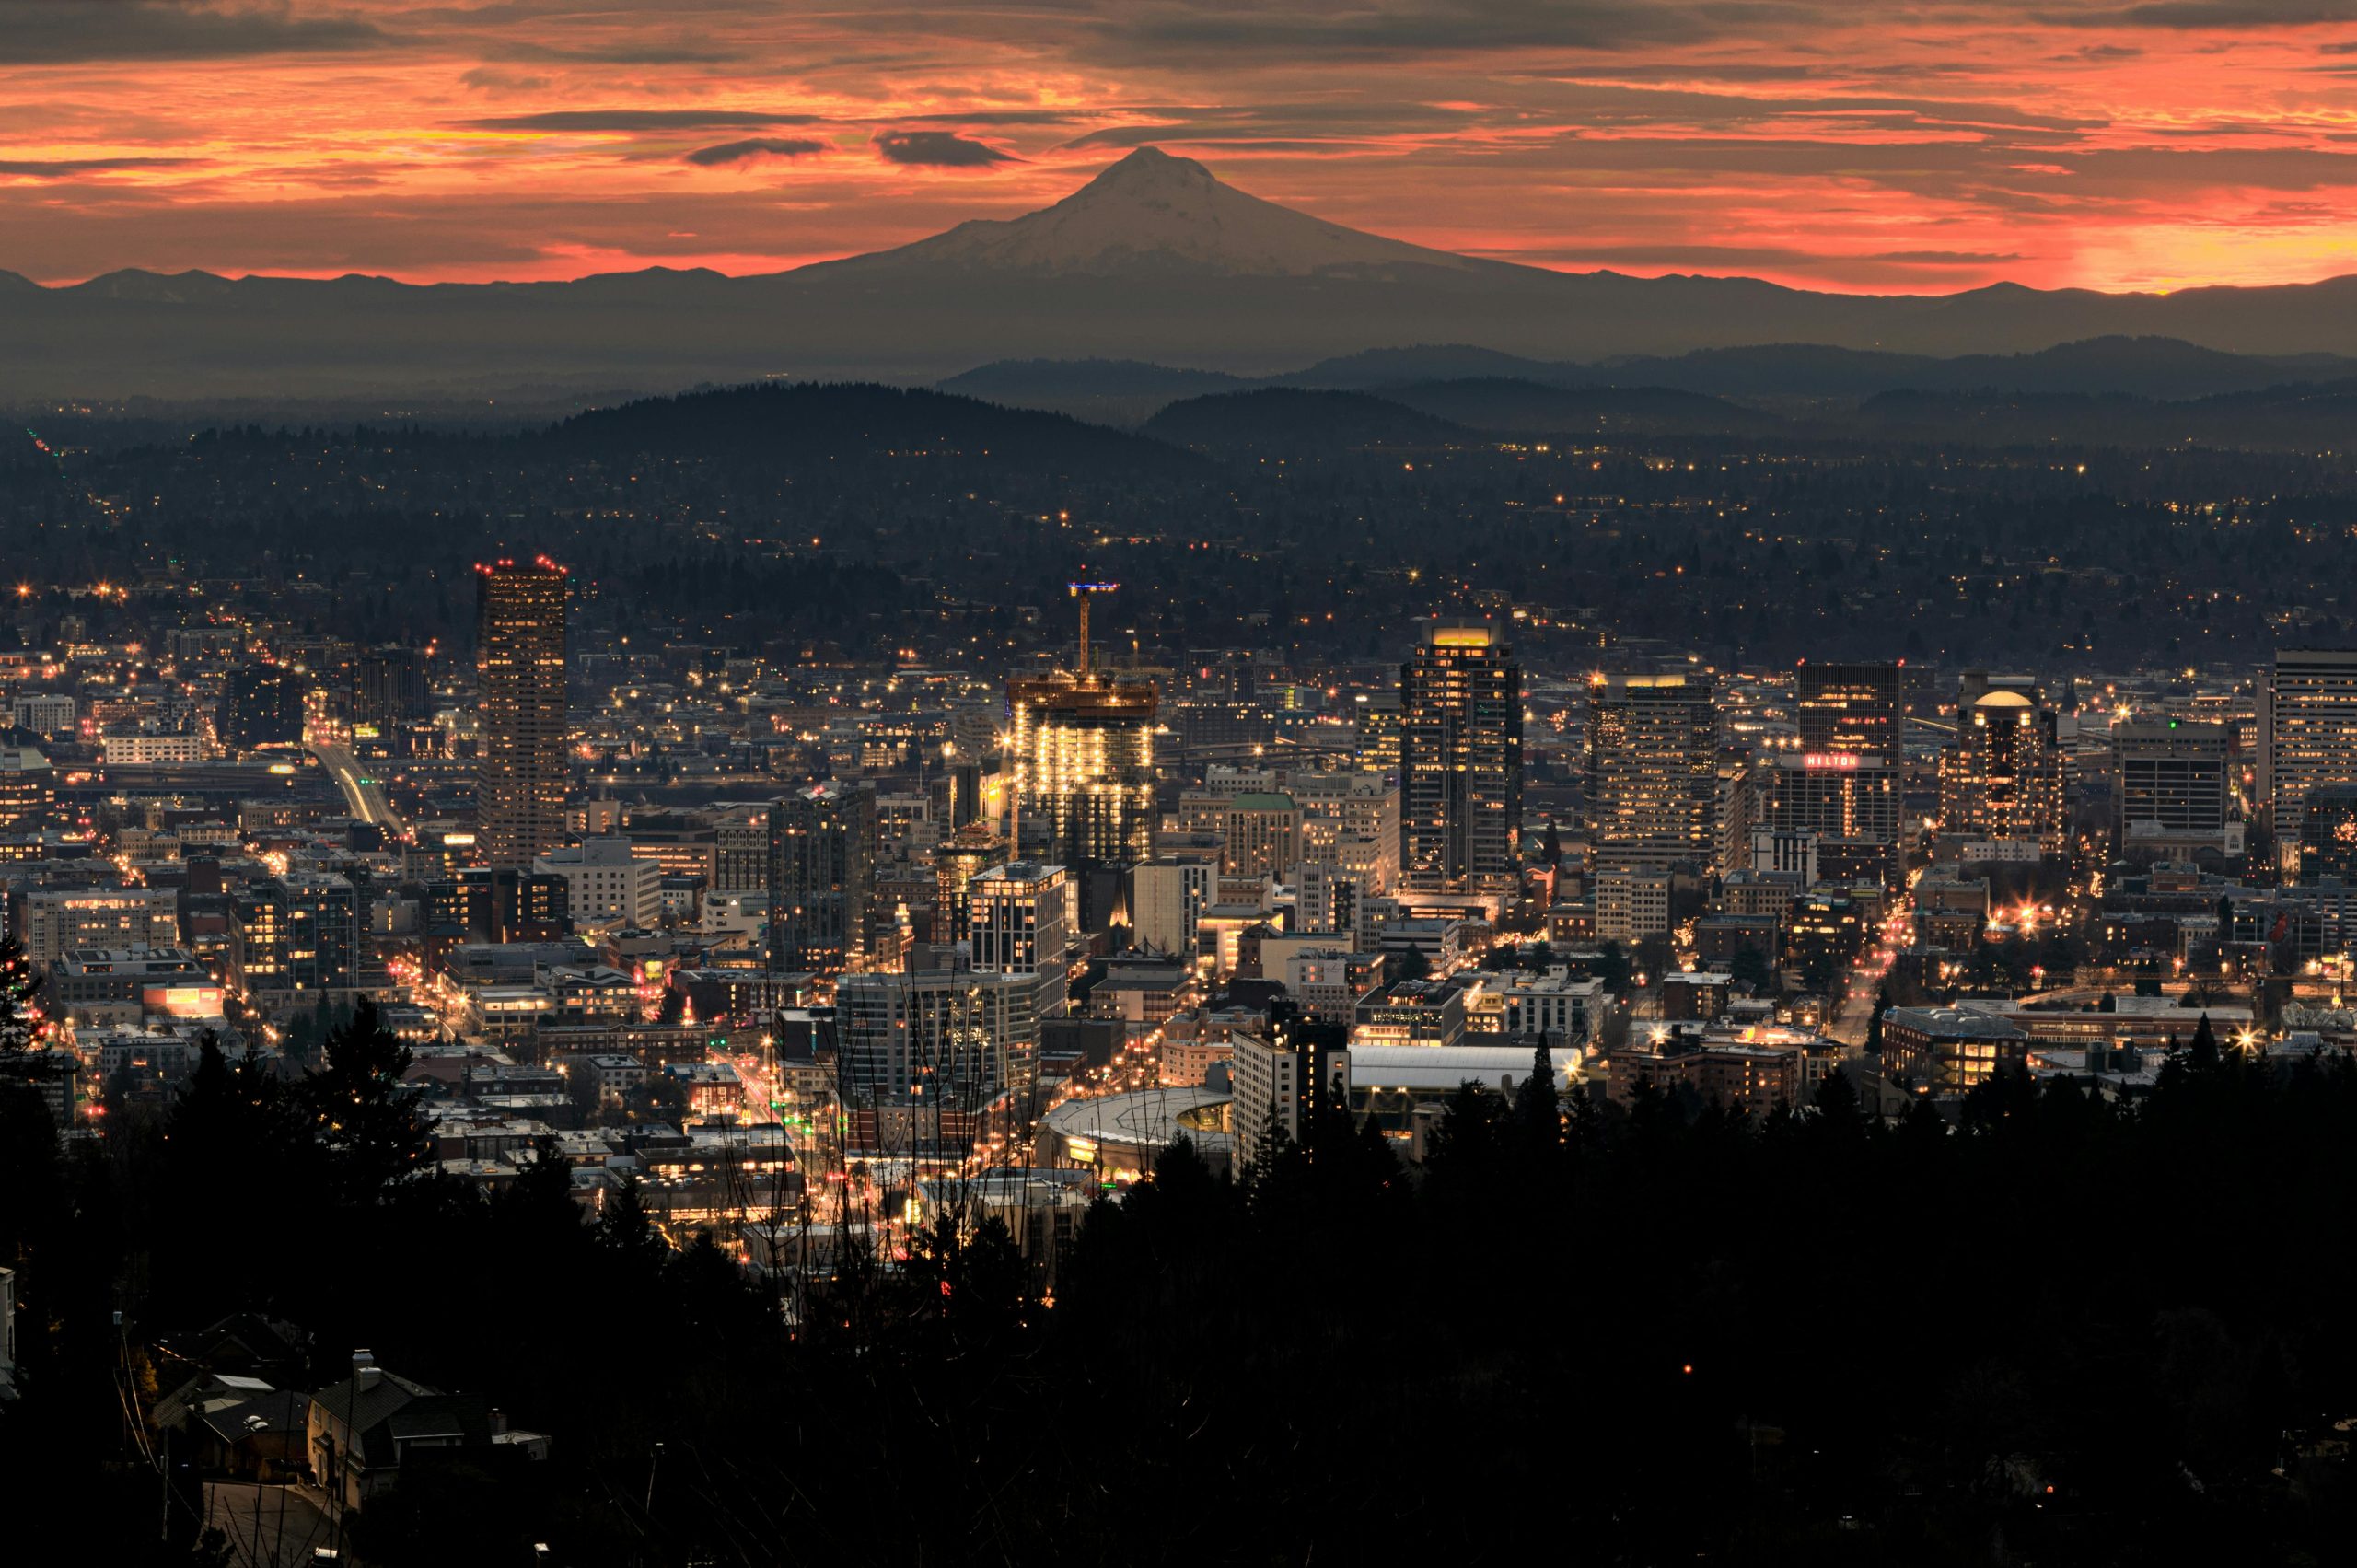 A view at dusk of downtown Portland's skyline with mountains behind it.